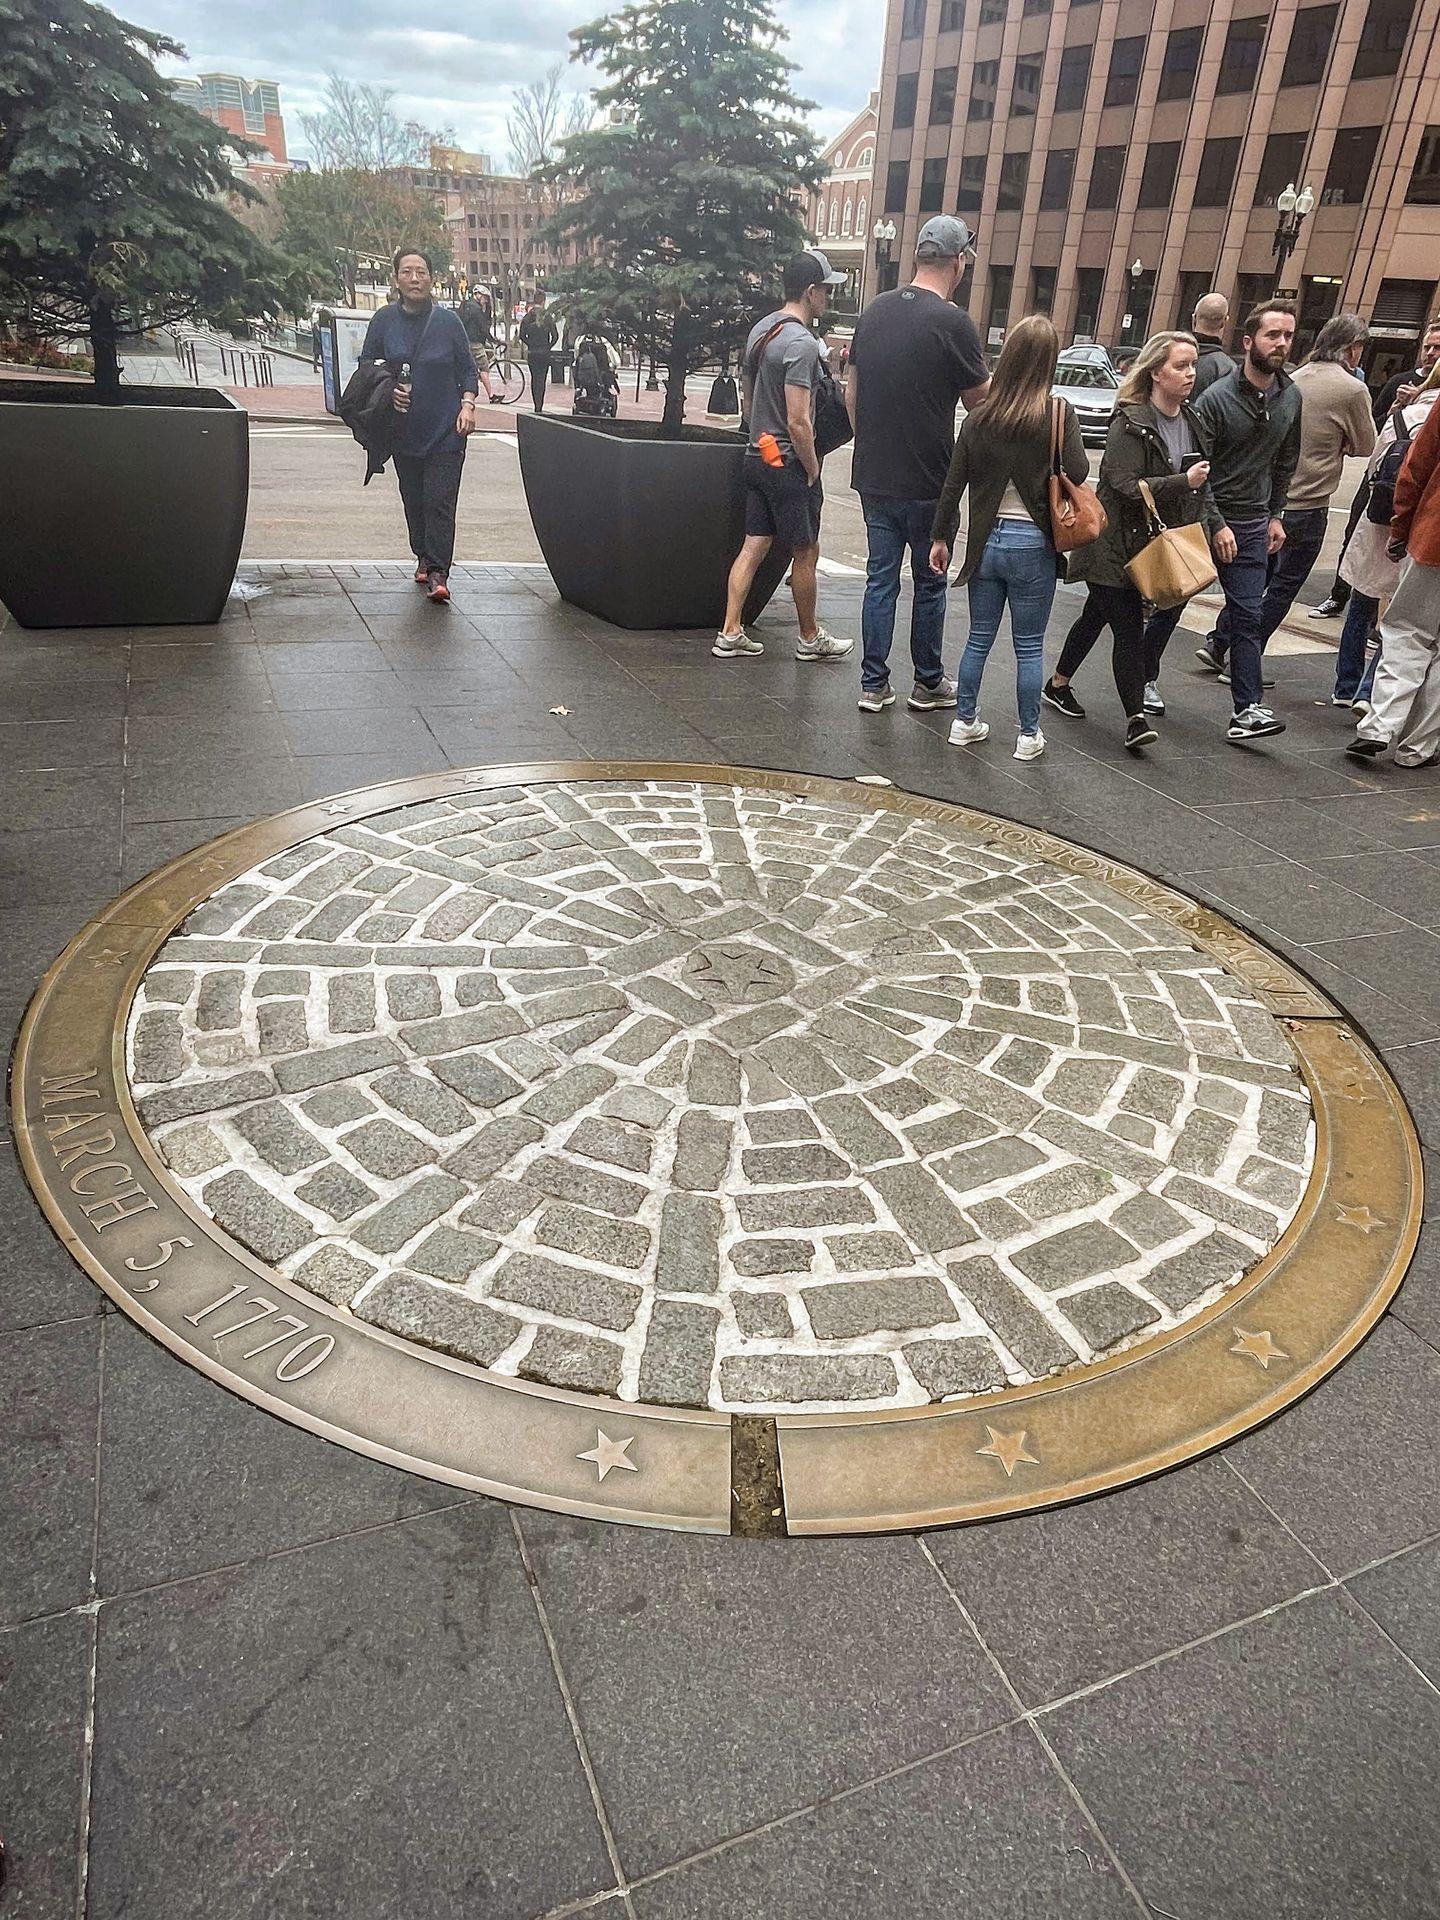 A large plague on the ground representing the place where the Boston Massacre occurred. The site is round and features bricks with a gold rim.